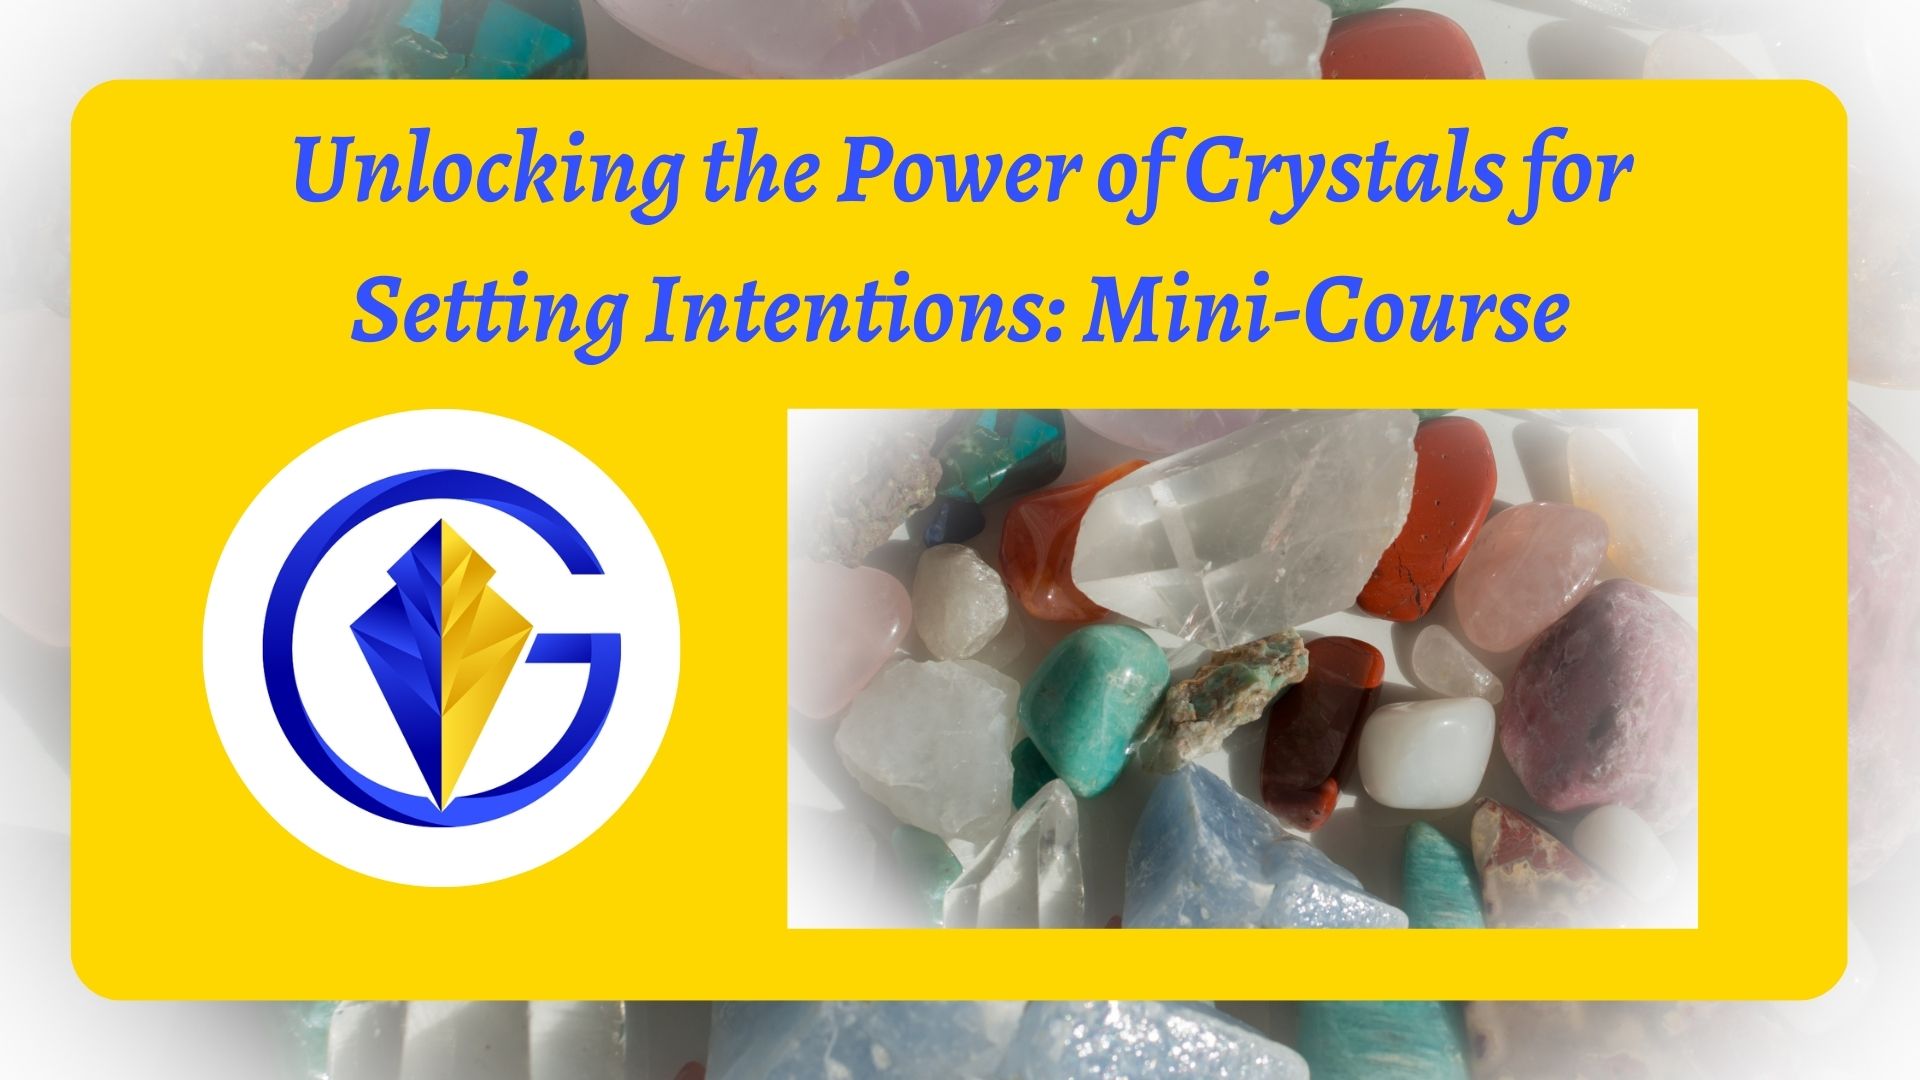 Unlocking the Power of Crystals for Setting Intentions Mini-Course